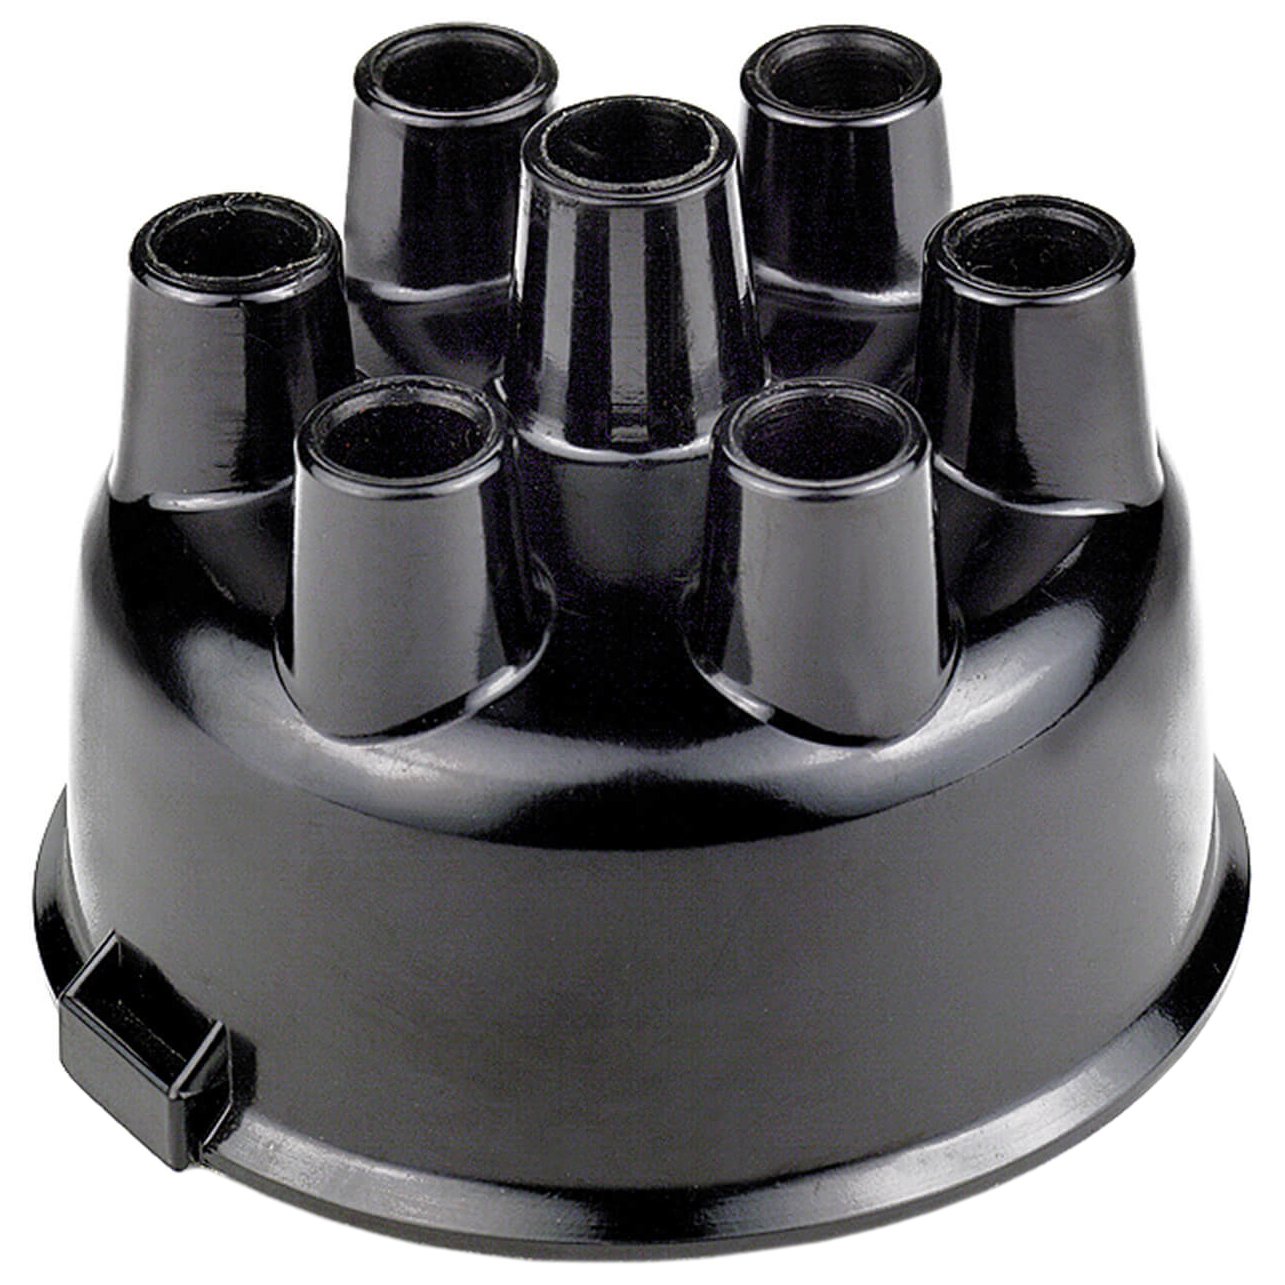 Distributor Cap For Mallory Series 25, 26, 37,